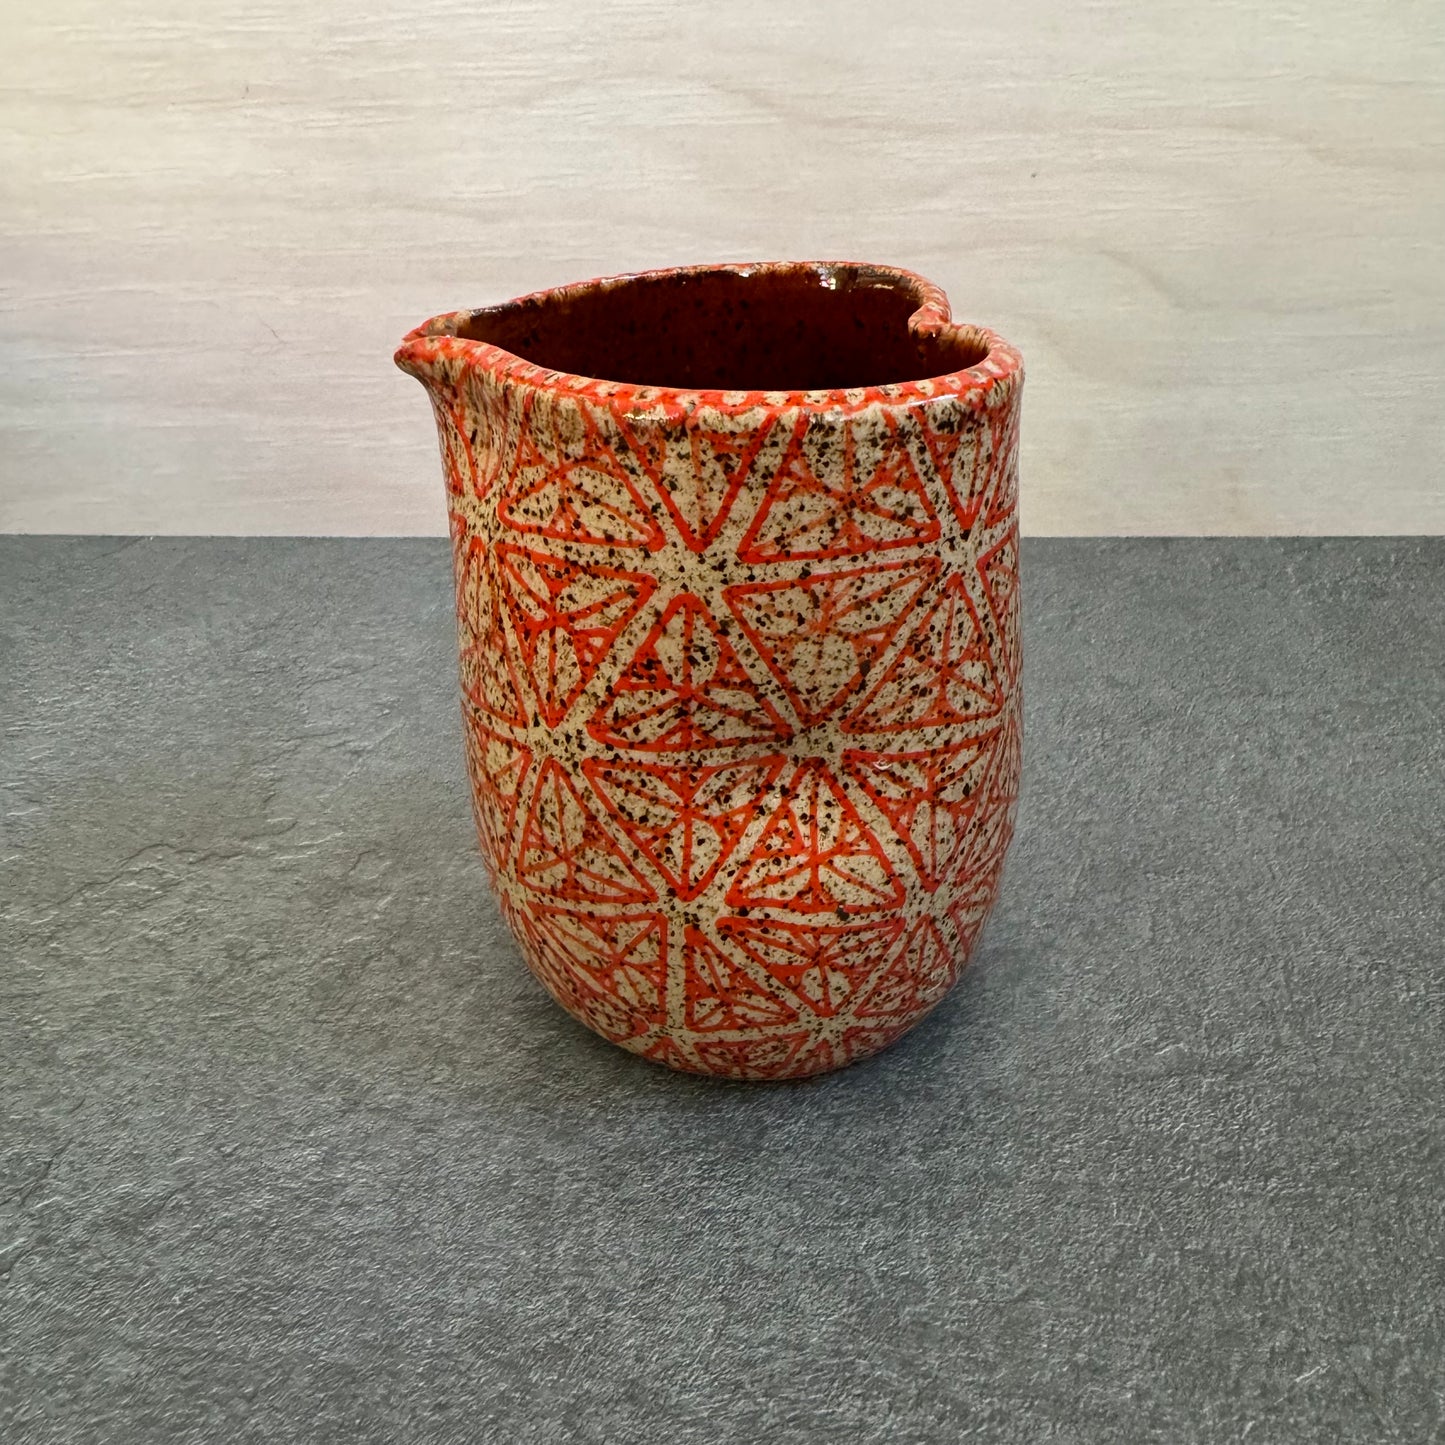 Heart Cup with Orange Triangle Design